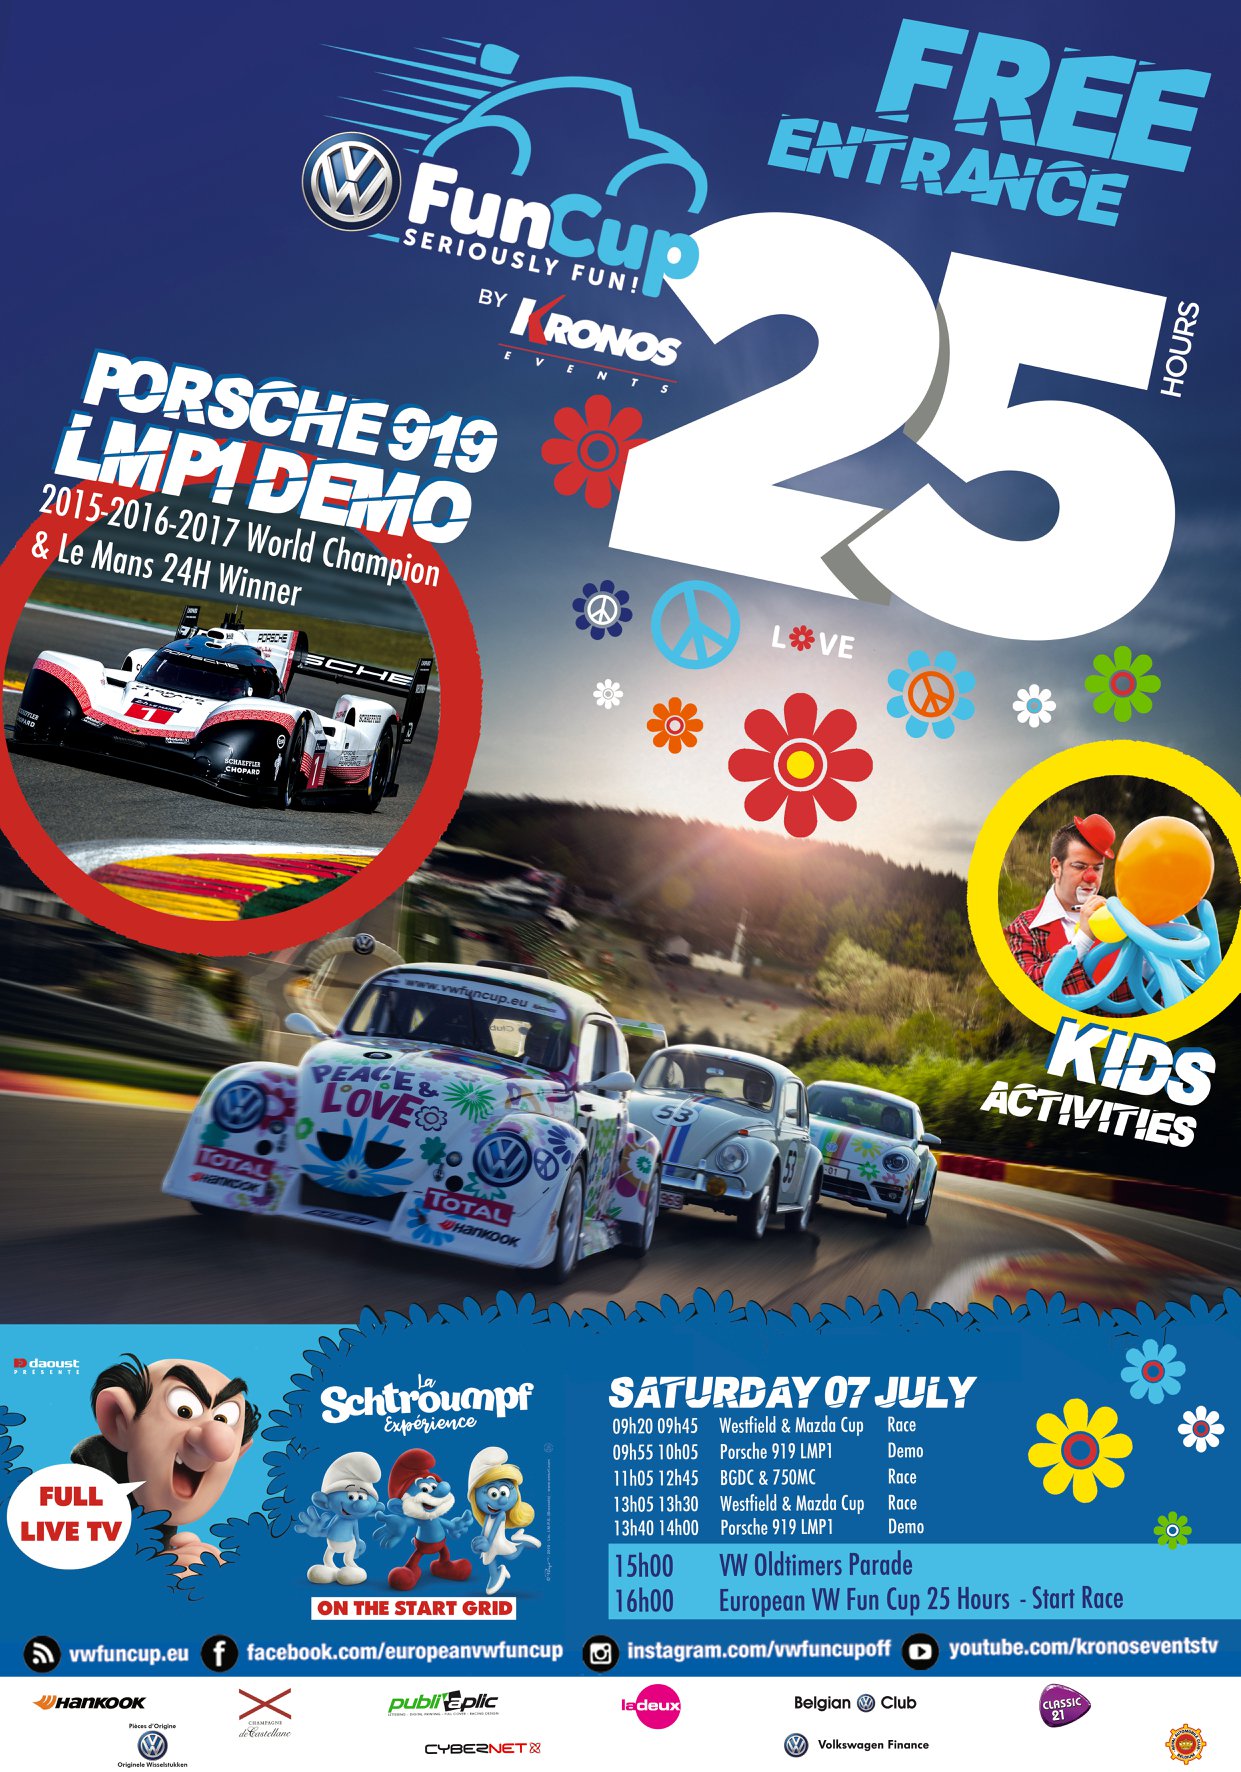 image 0 - The 25 Hours VW Fun Cup Poster Unveiled!